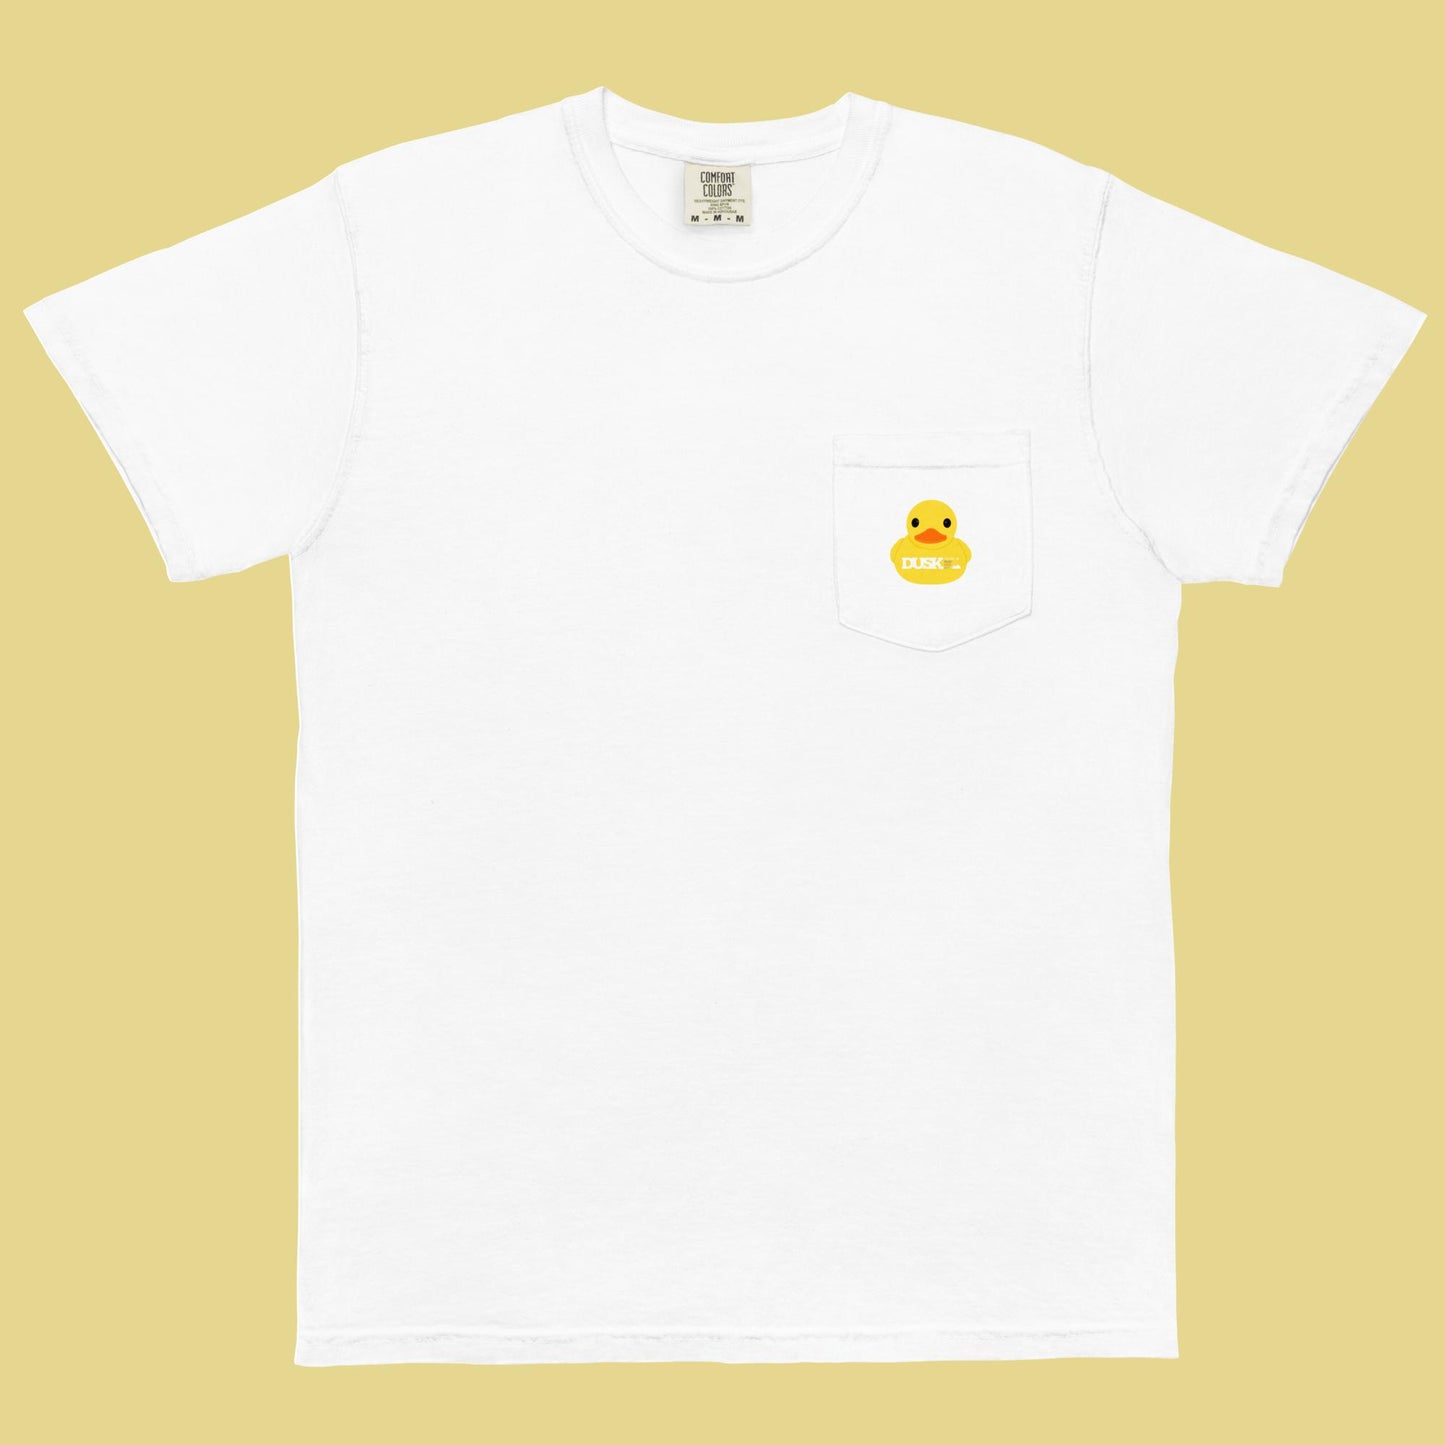 Rubber Duckie, You're the One - Unisex Pocket T-Shirt